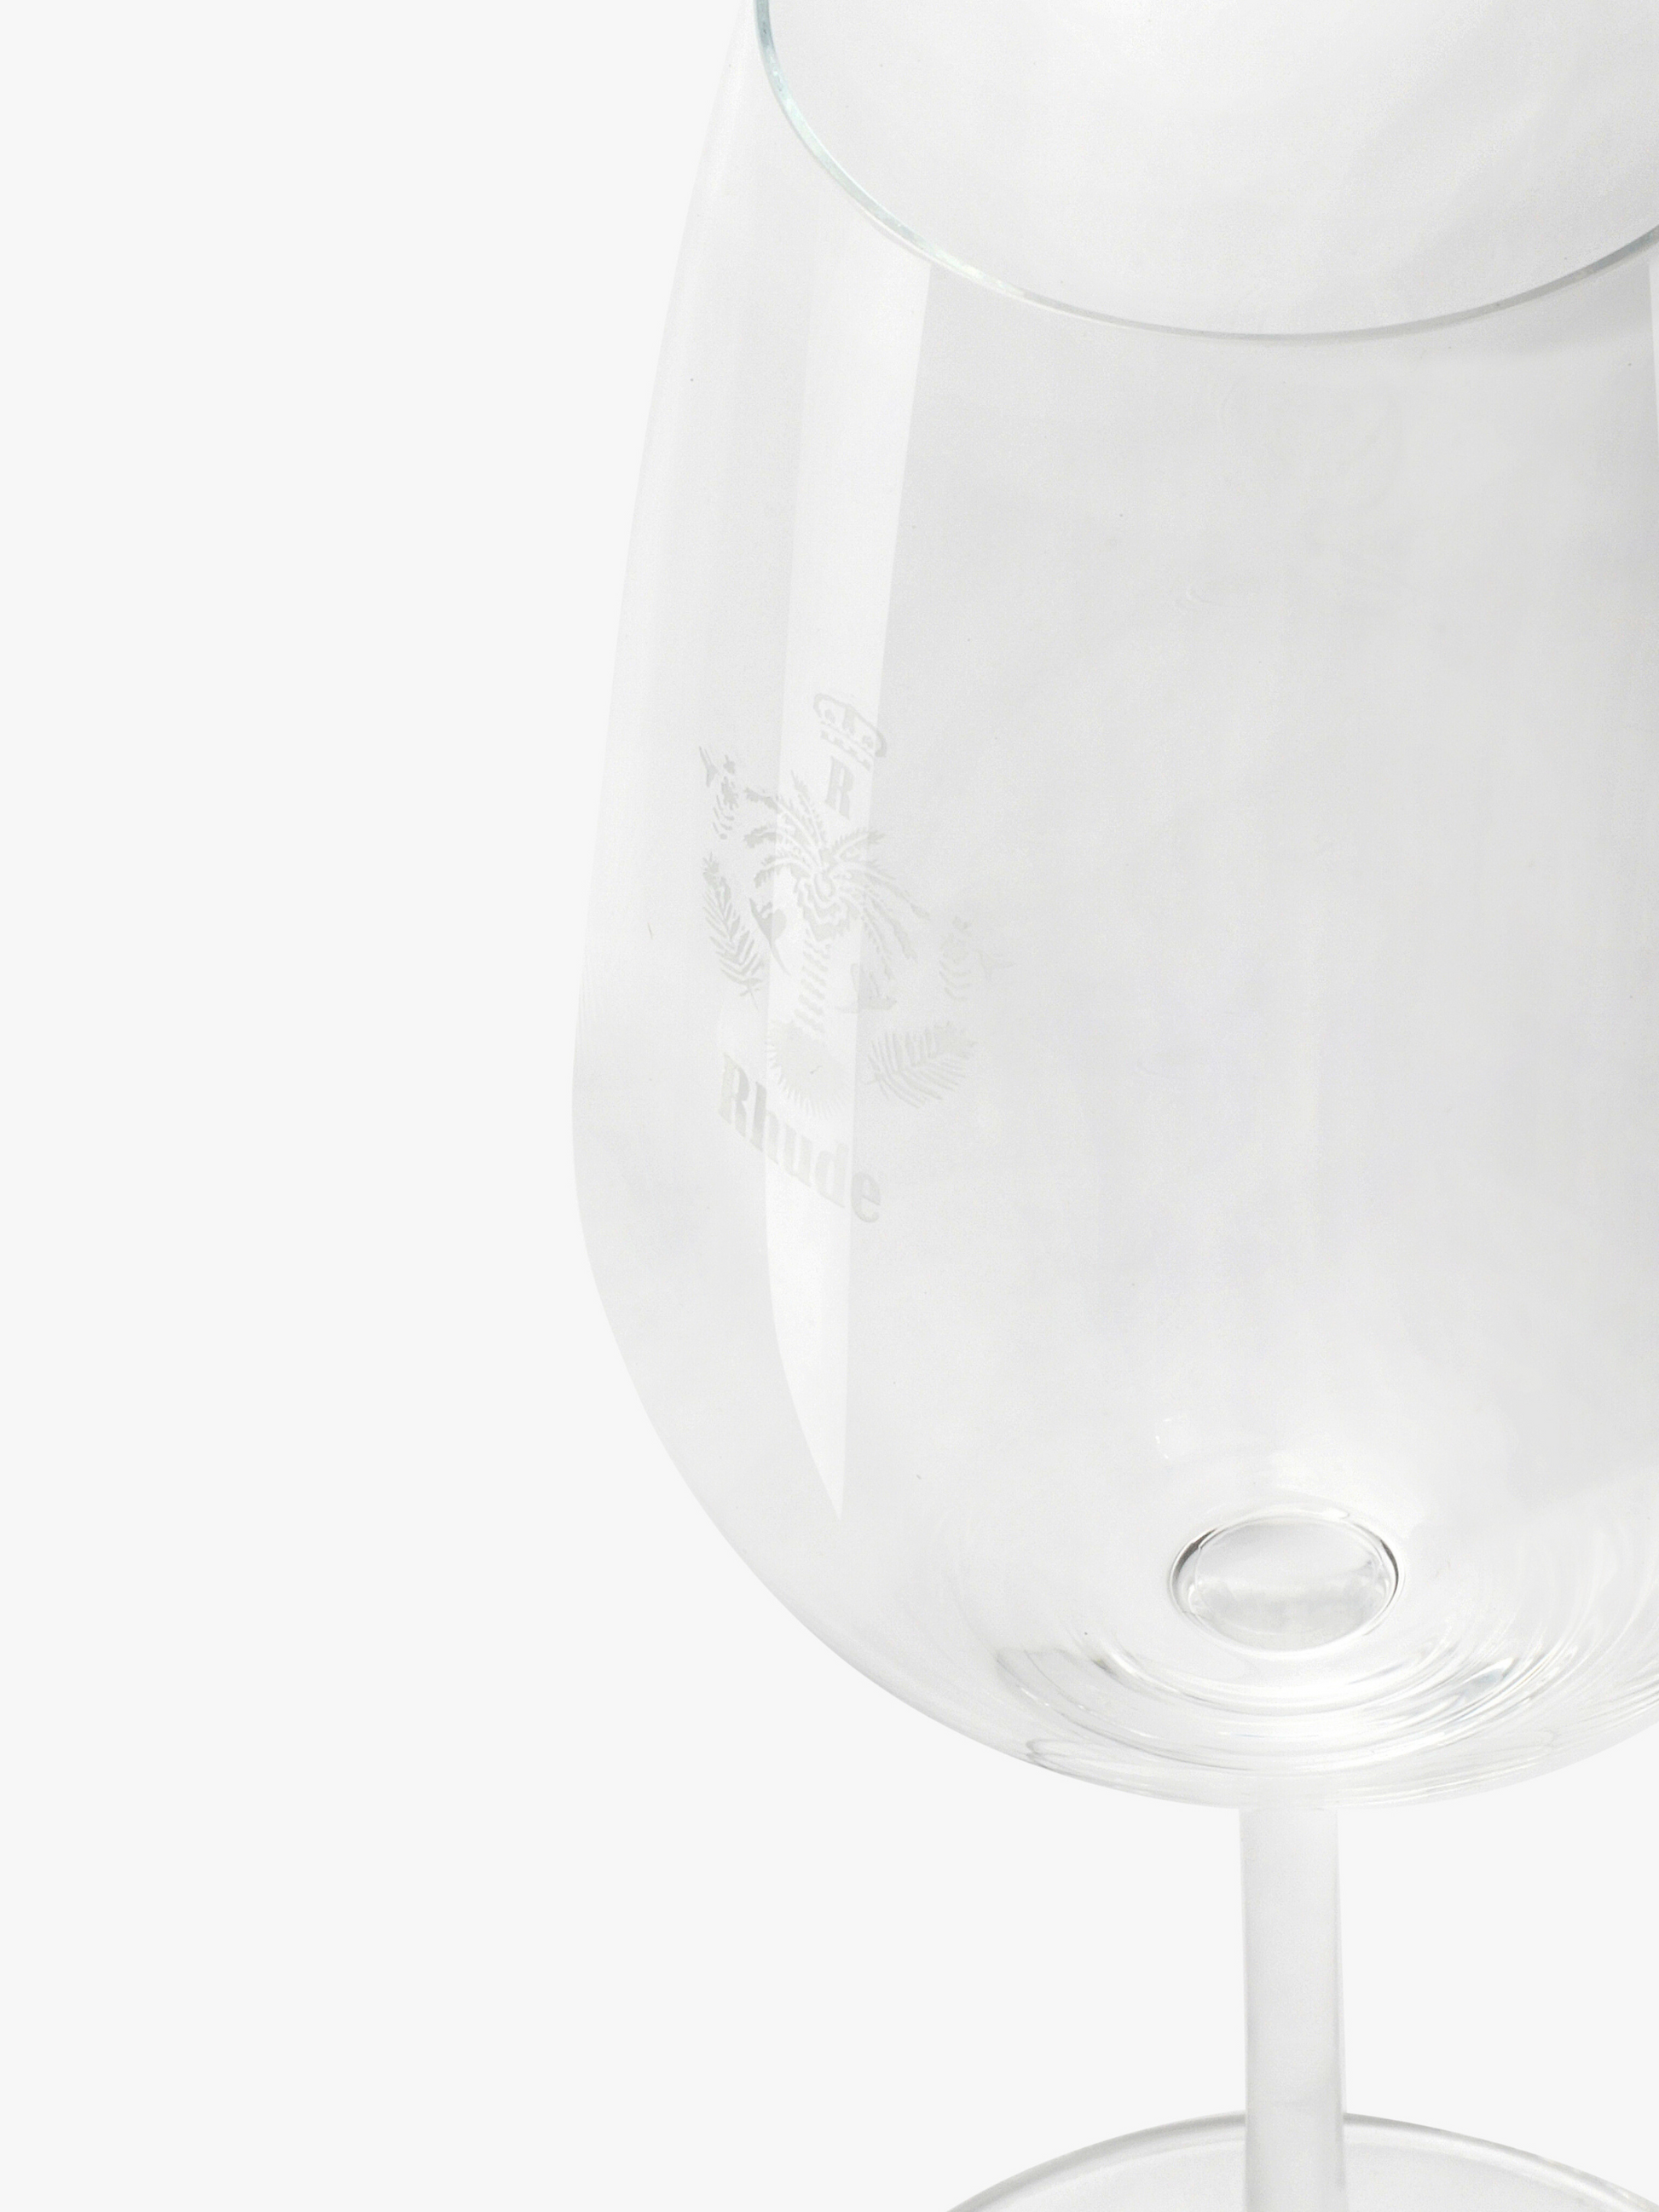 2 White Wine Glass Set - Design: HH5 - Everything Etched